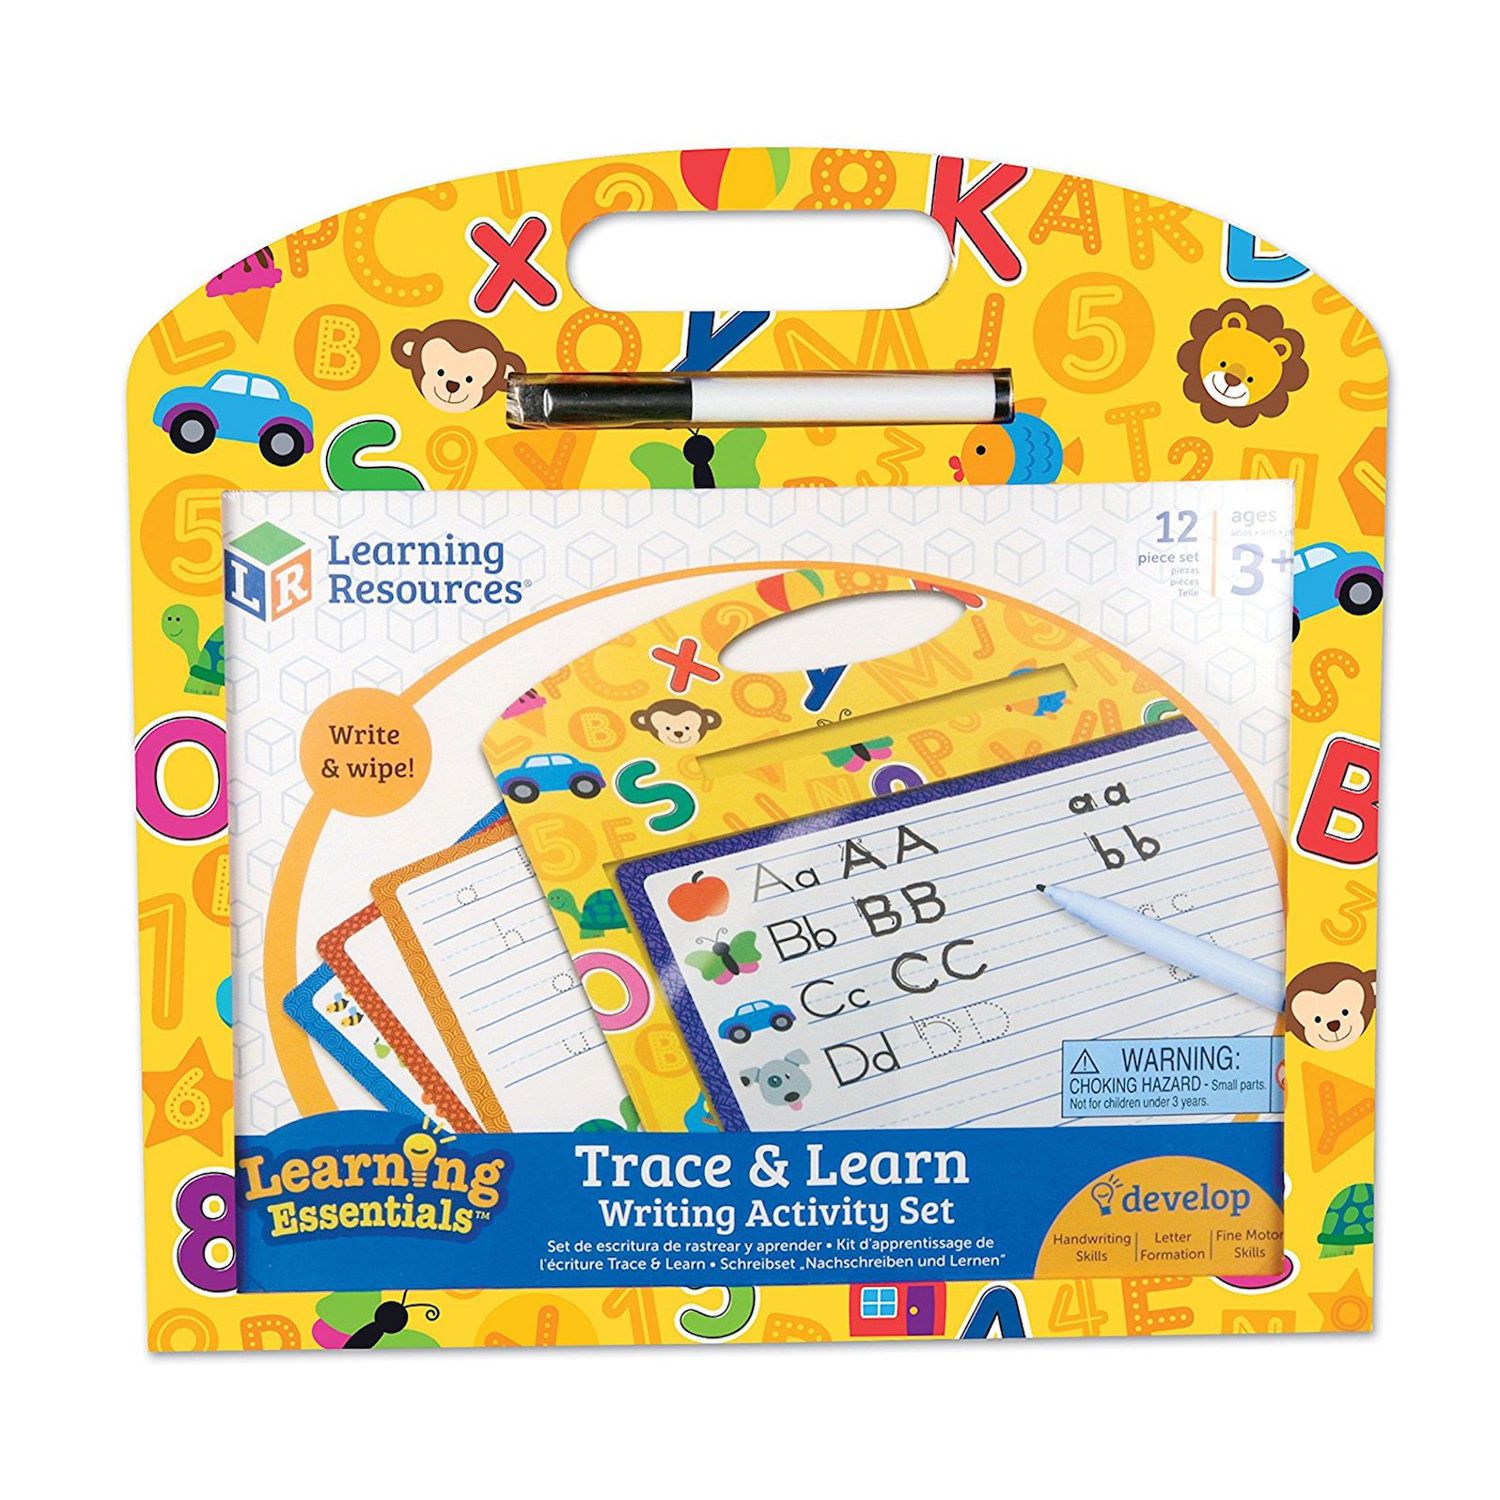 Image for Learning Resources Trace & Learn Writing Activity Set at Kohl's.